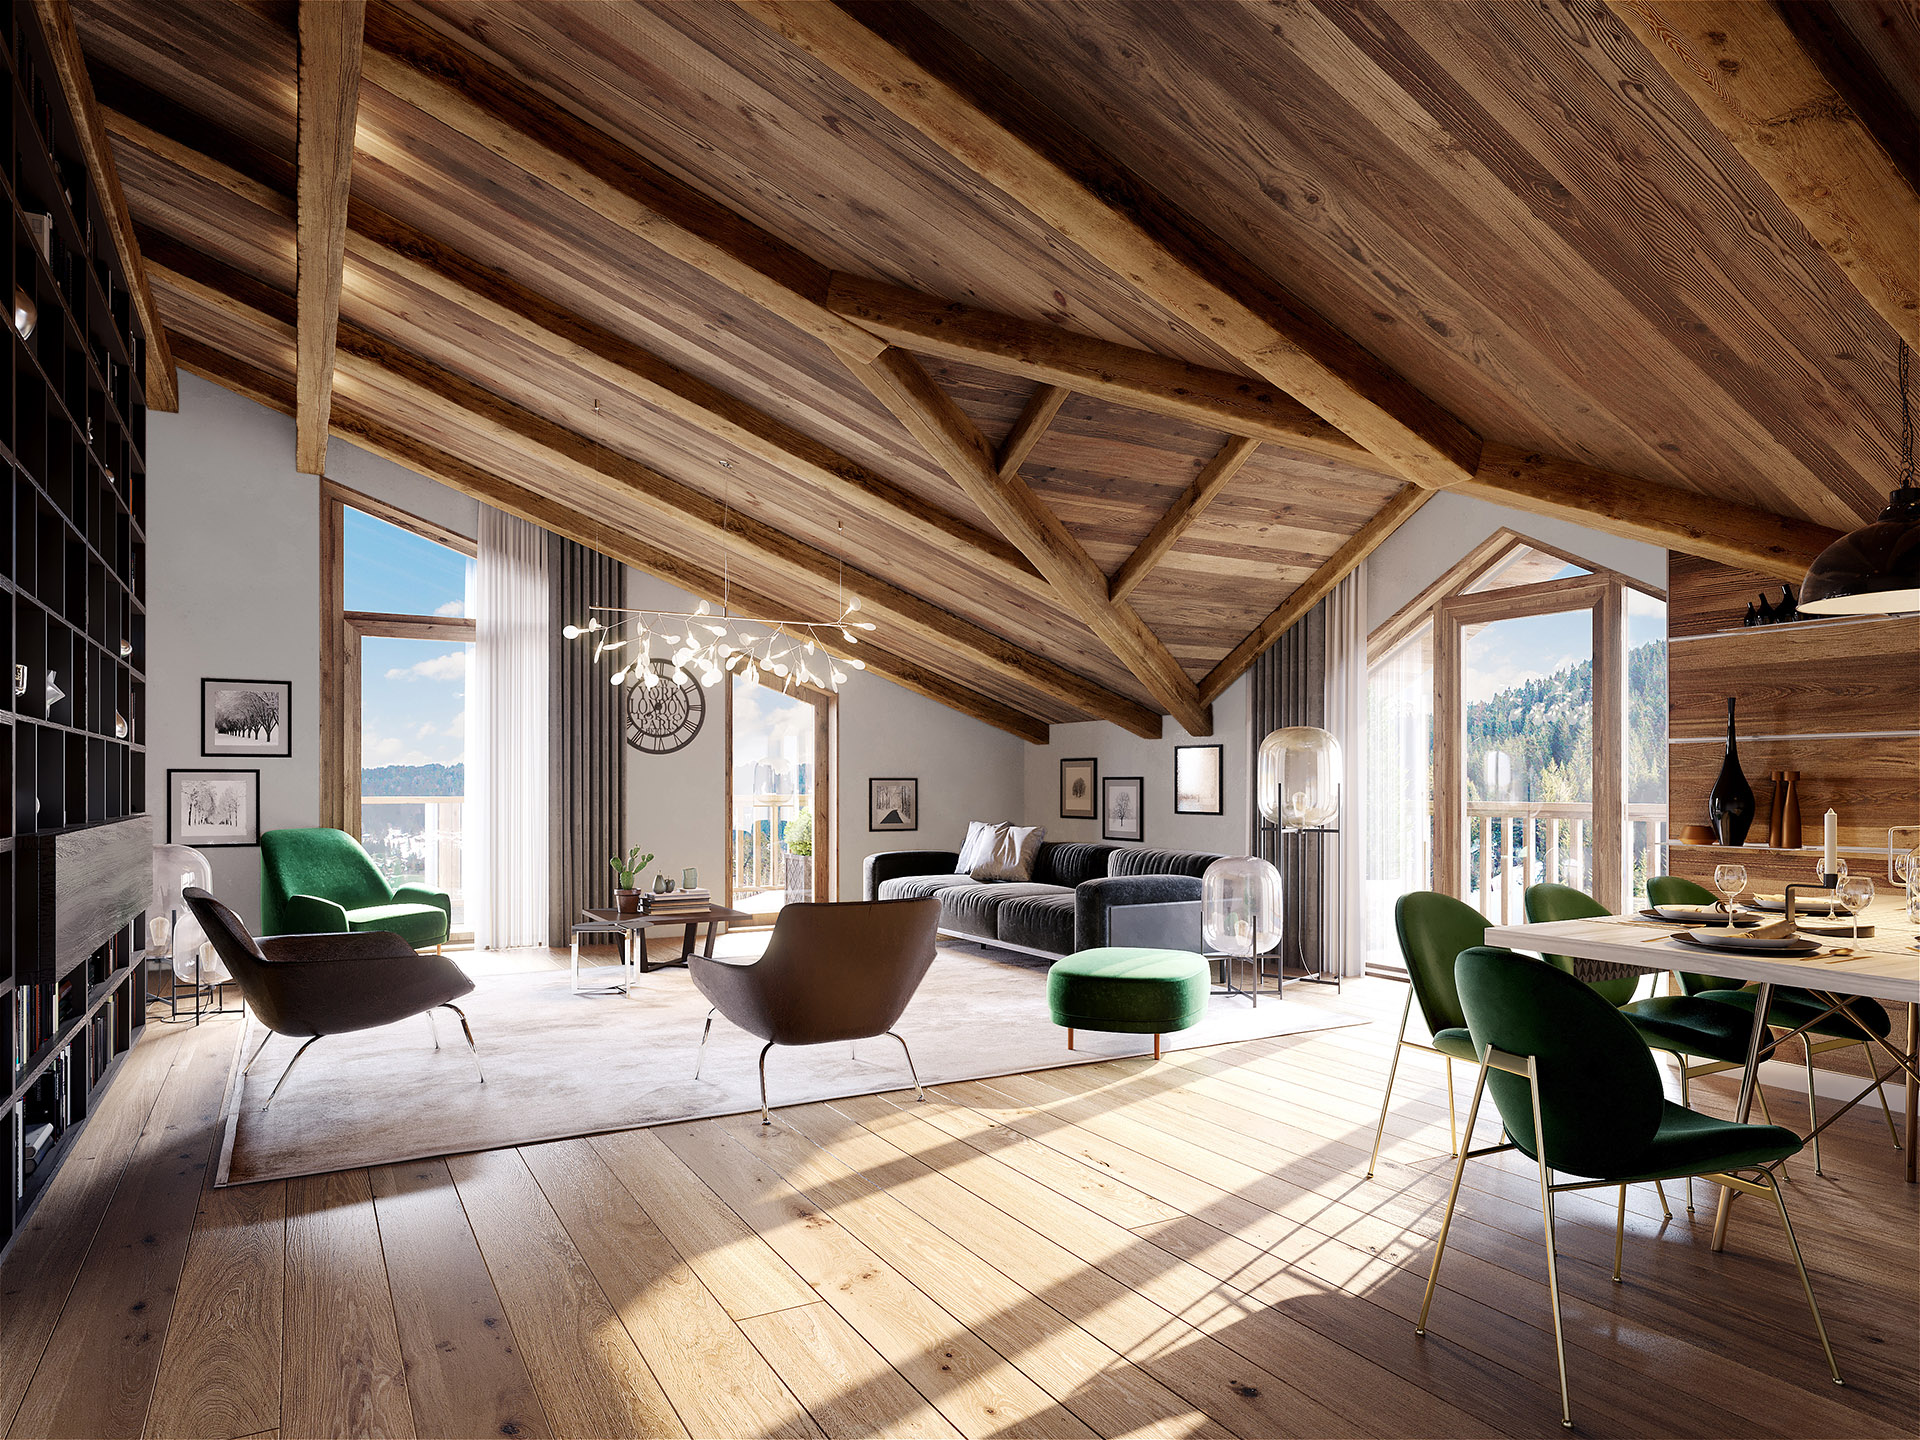 3D image of a living room and dining room in a luxurious chalet